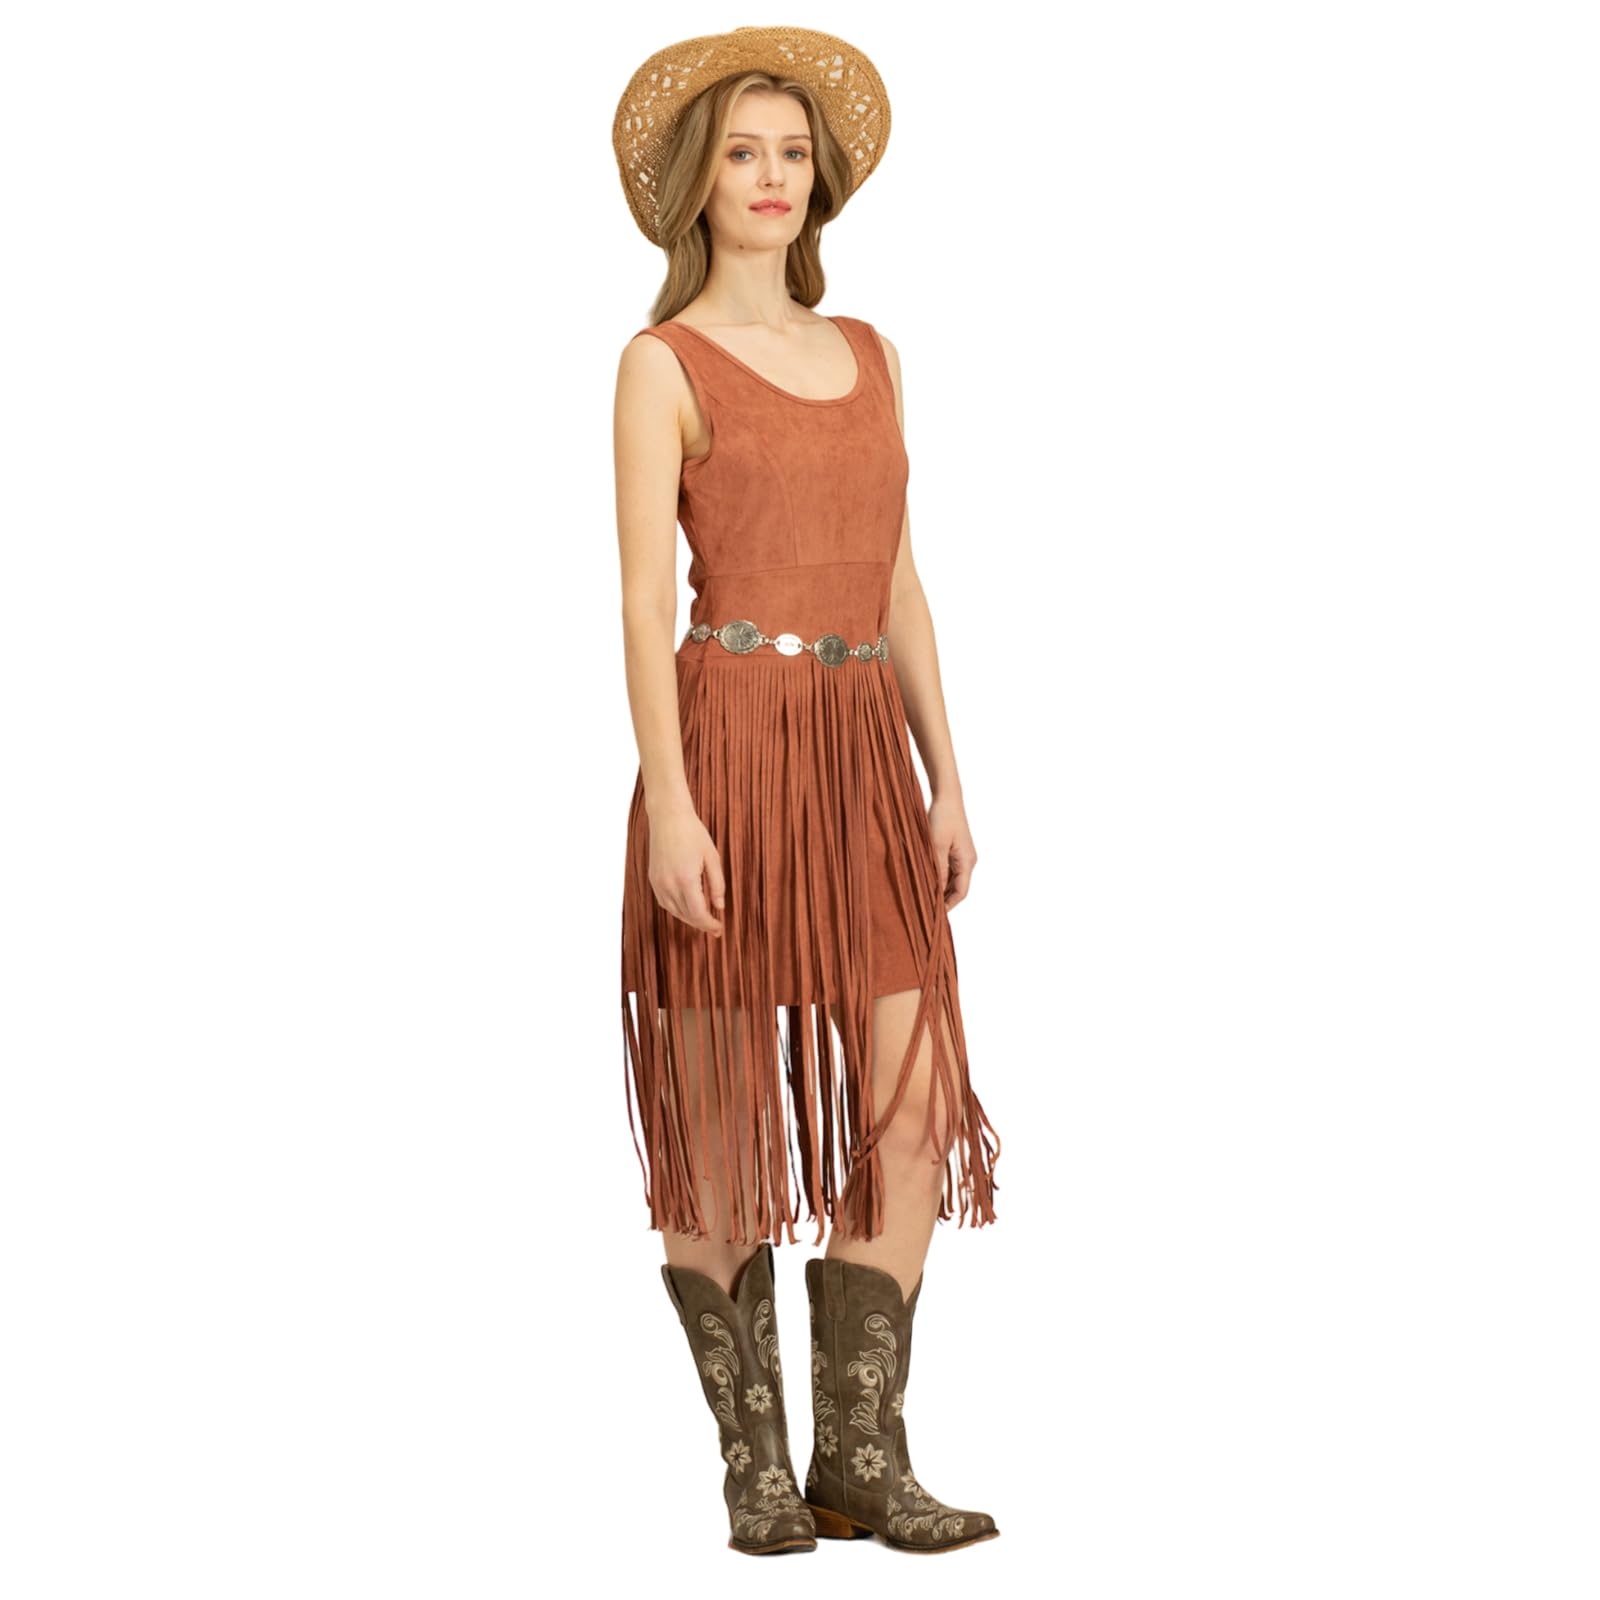 IUV Western Dress for Women Cowgirl Fringe Dresses Sleeveless Tank Tassel Skirt Country Summer Cowboy Outfit Without Belt